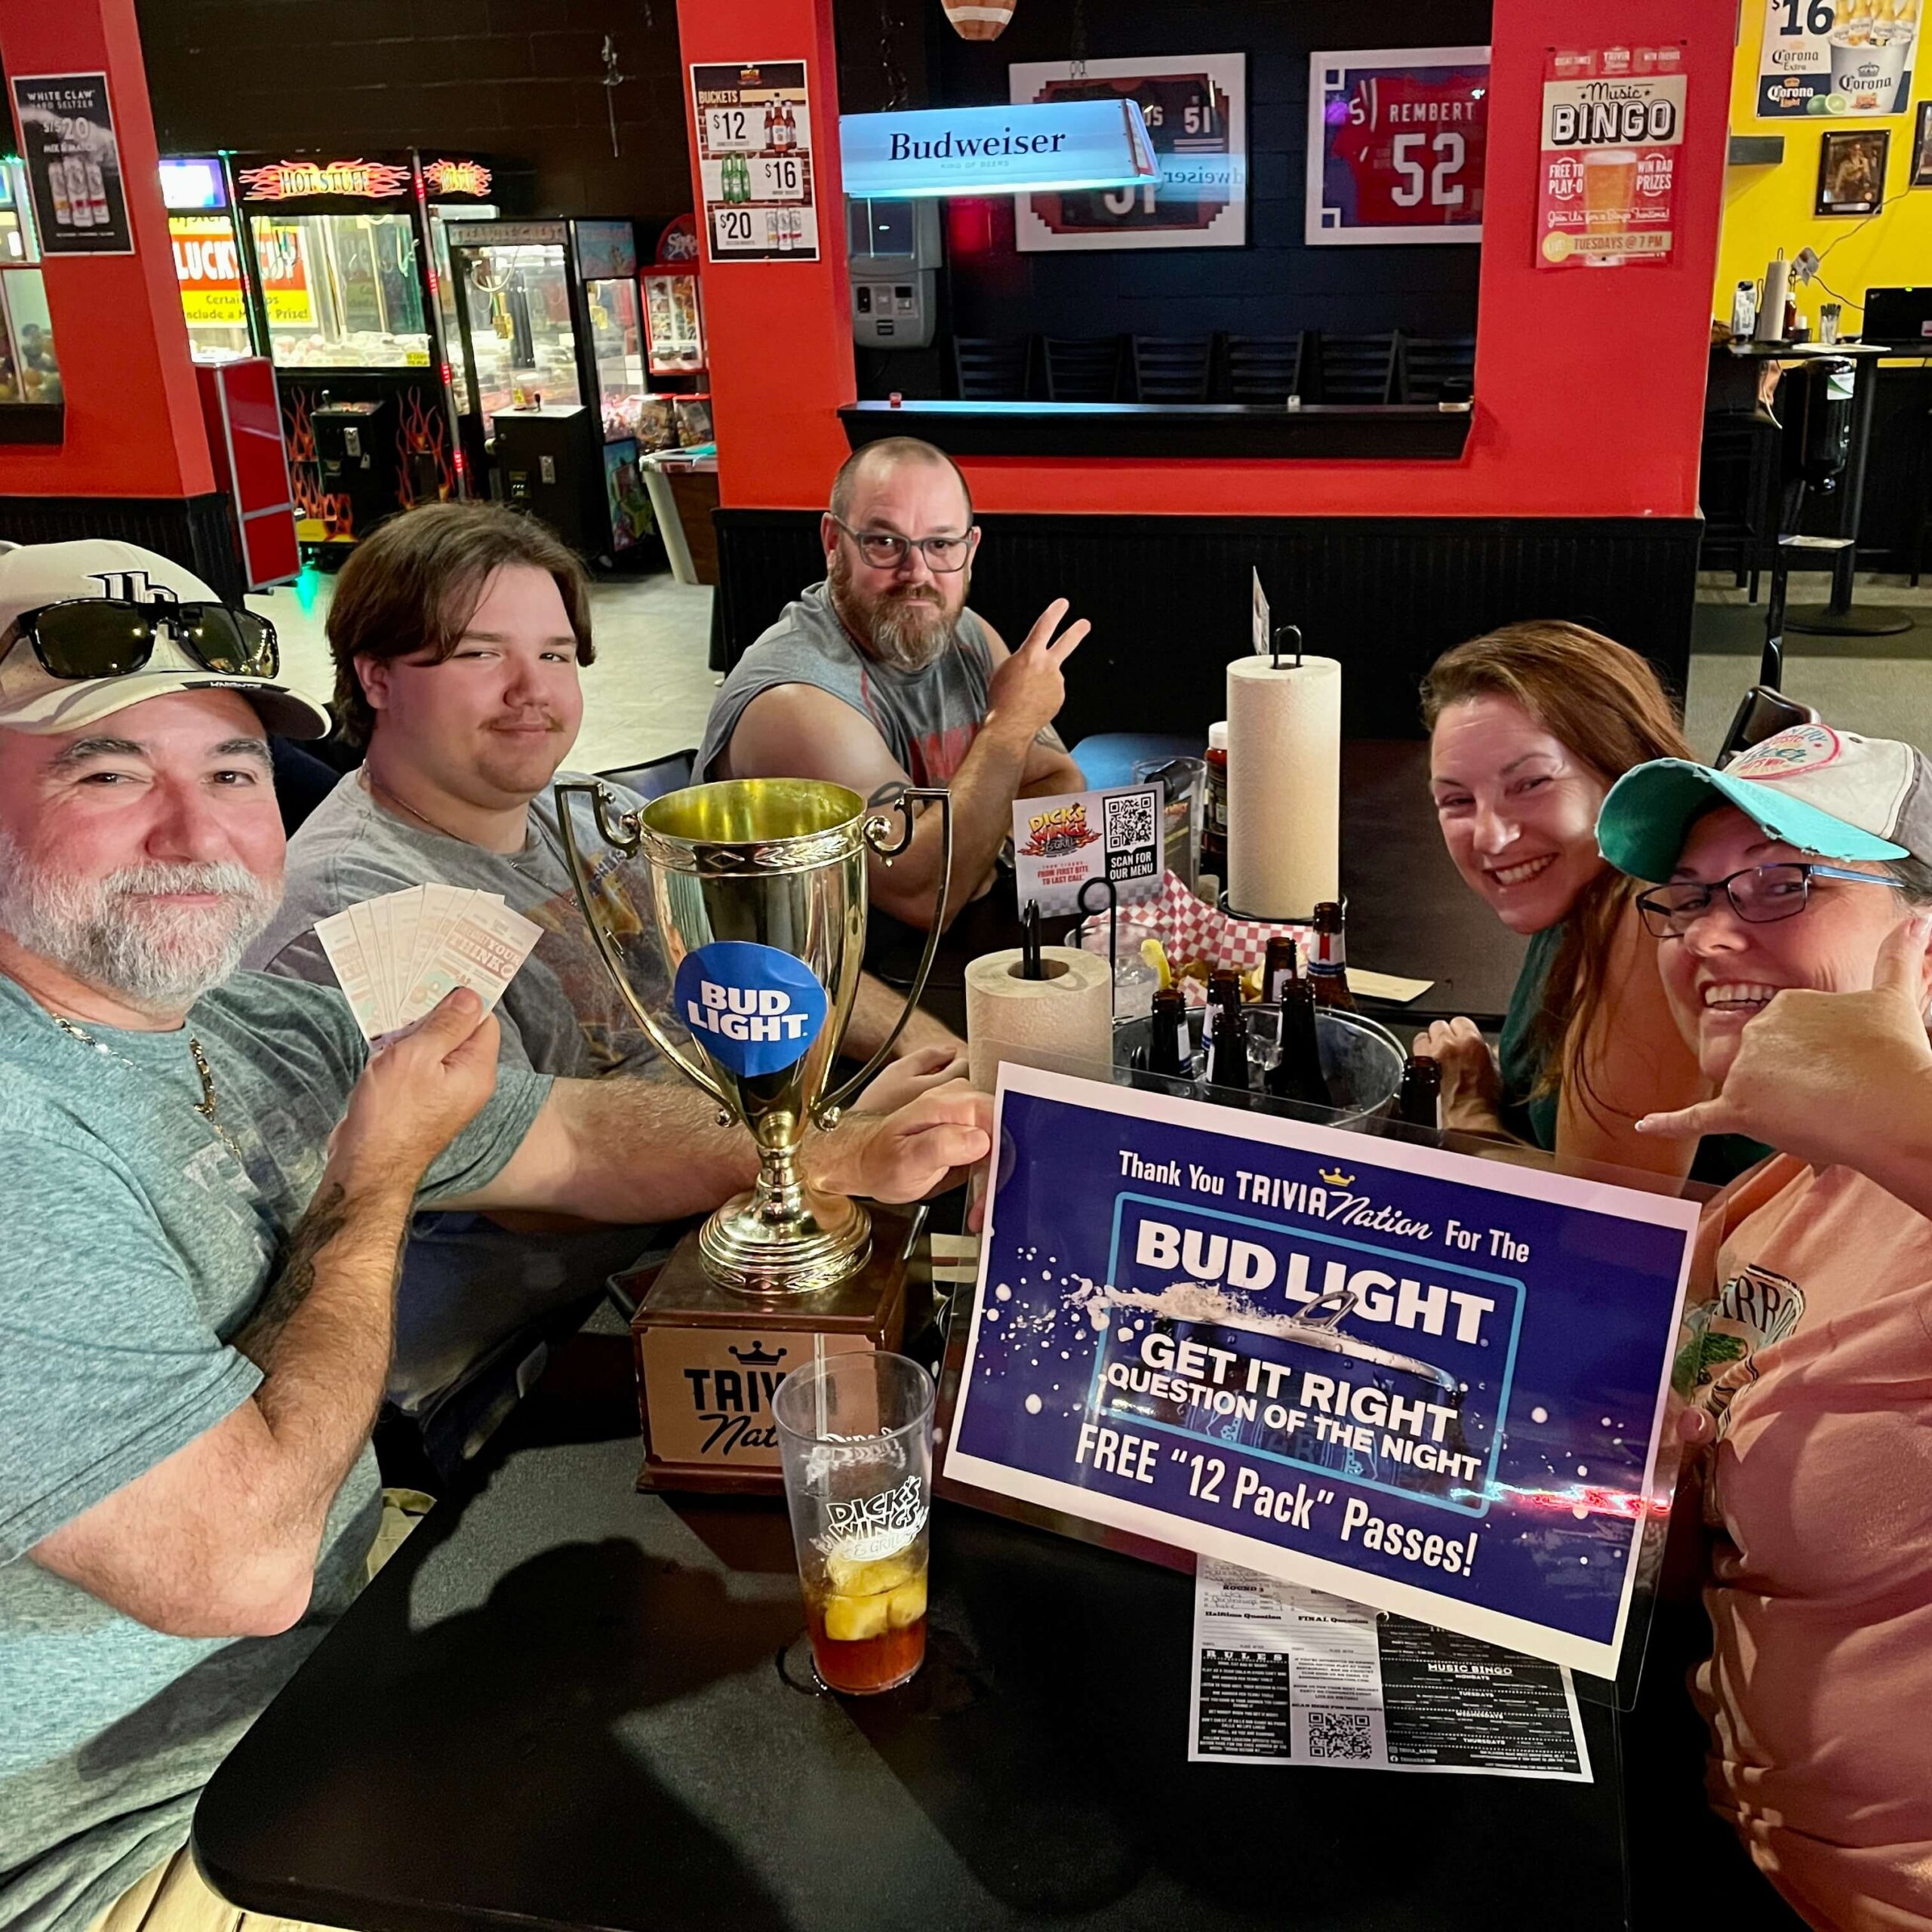 Dick's Wings and Grill Jacksonville FL 32225 trivia night 9